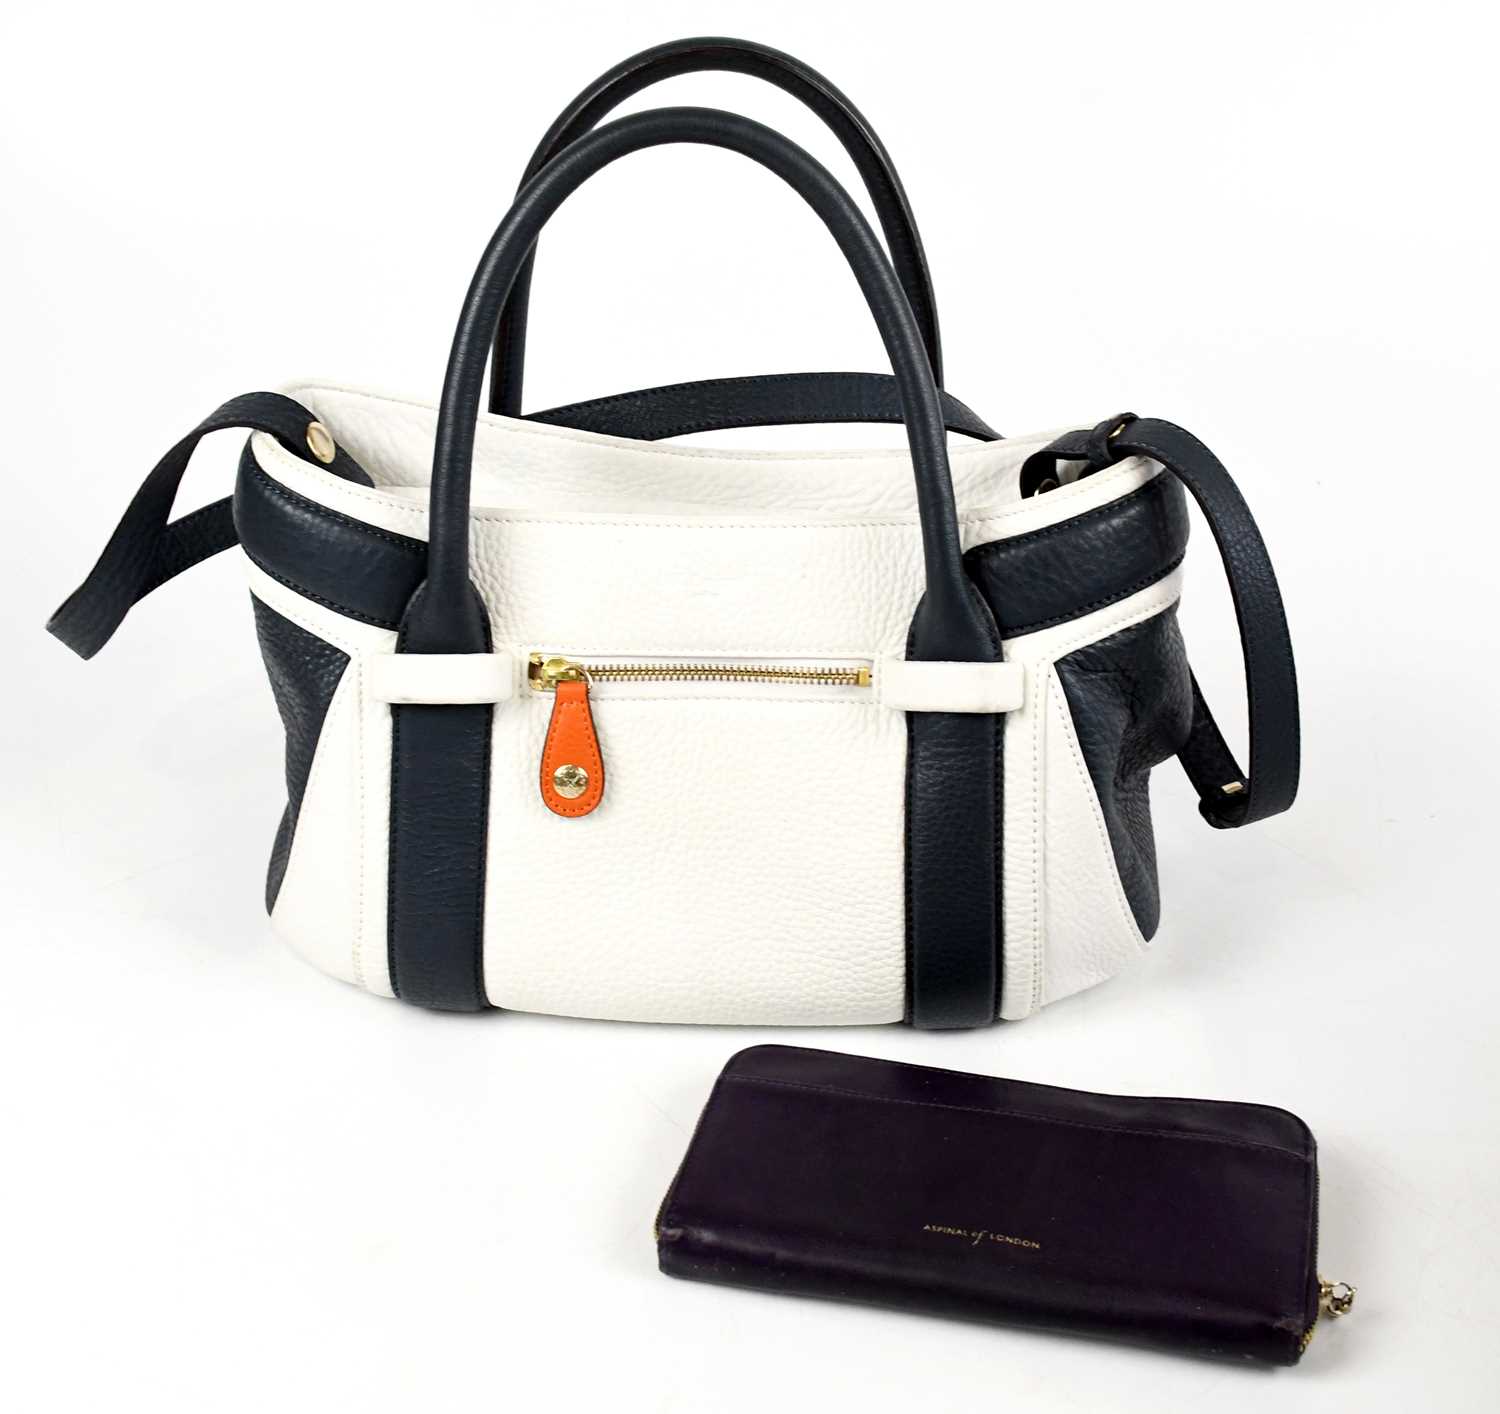 L.K BENNETT, LONDON; a white pebbled leather classic-style handbag trimmed with navy blue leather